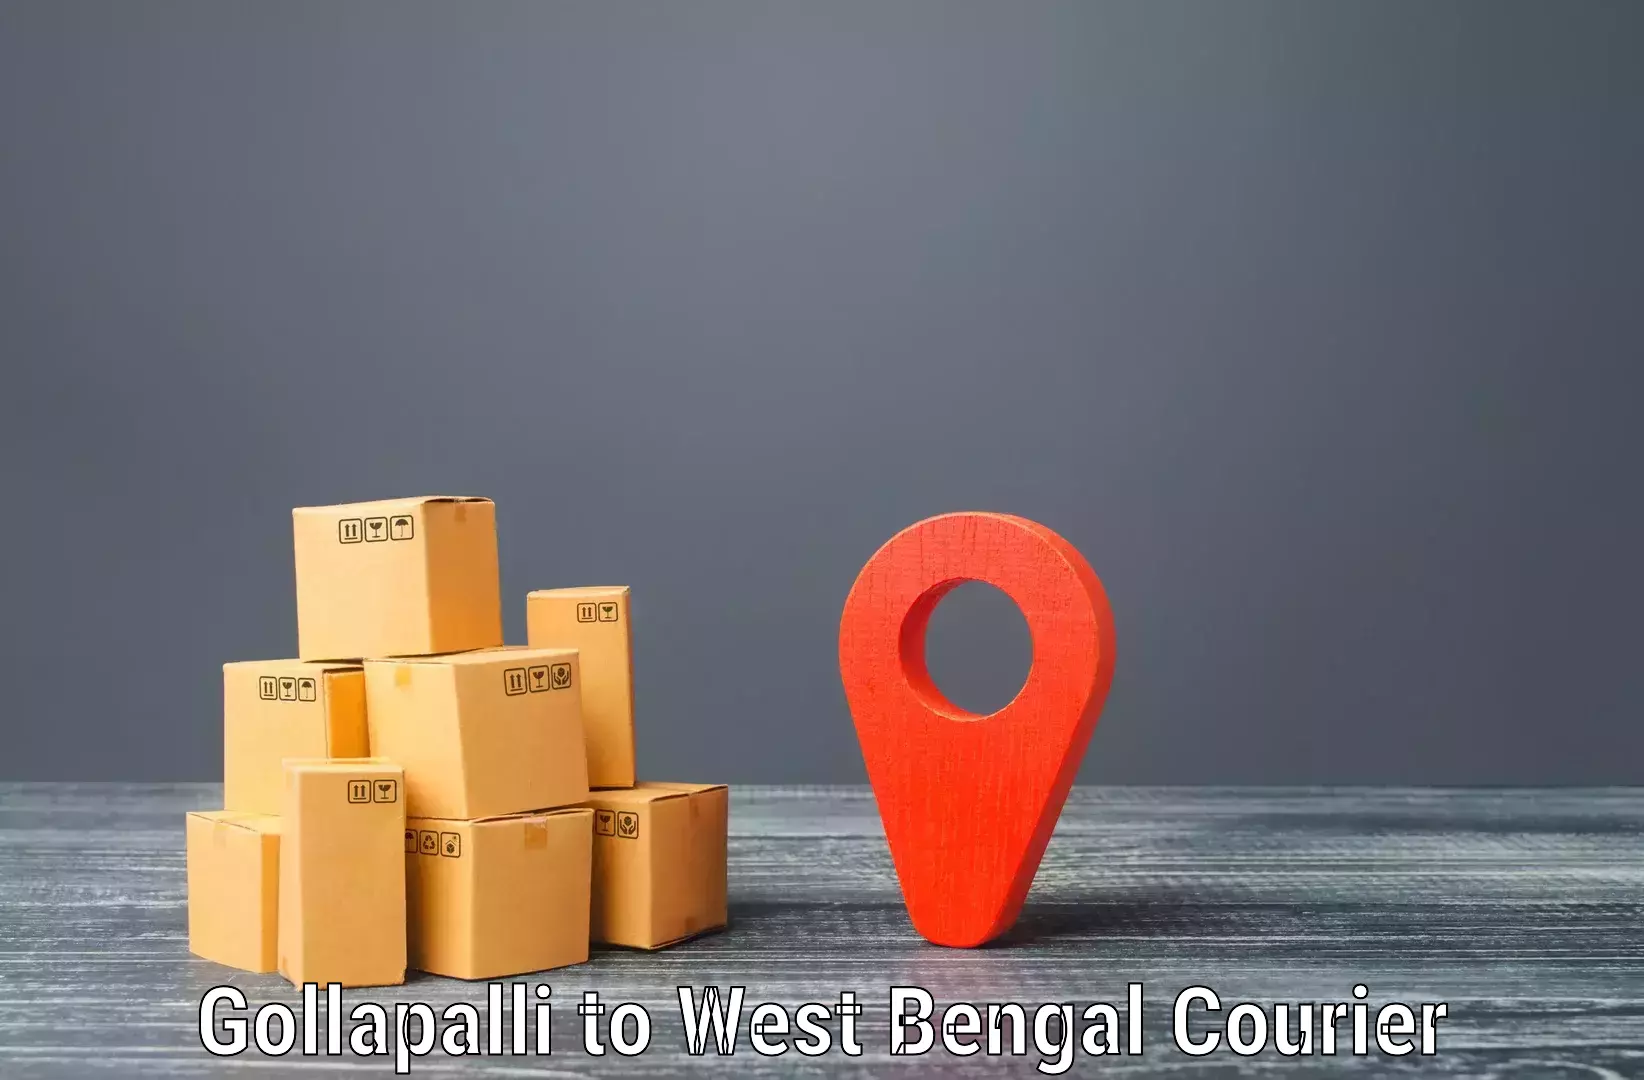 Courier service innovation Gollapalli to Balurghat